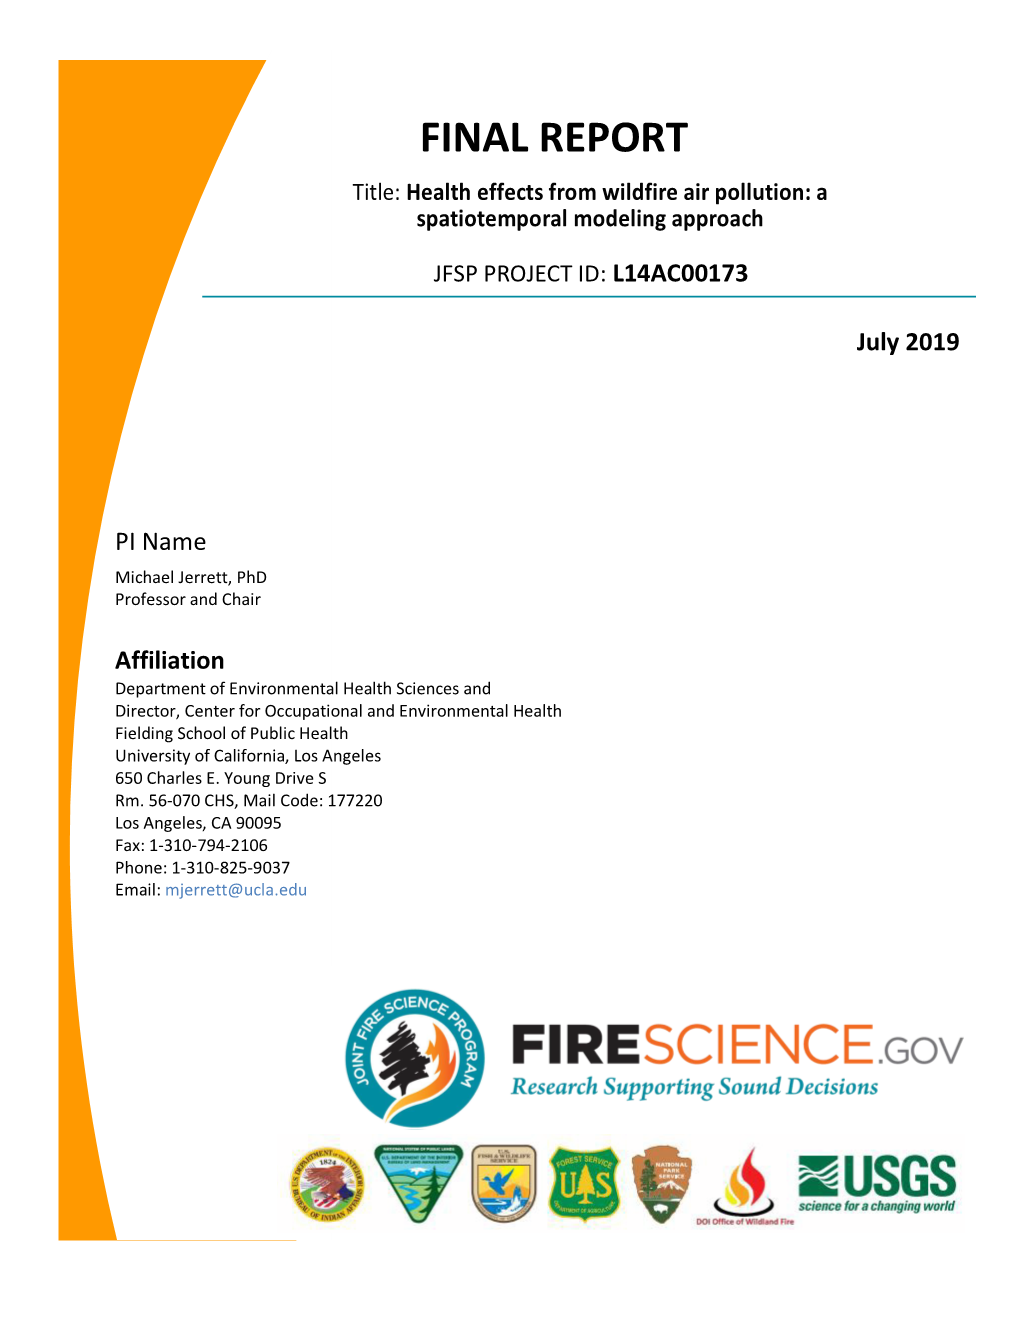 FINAL REPORT Title: Health Effects from Wildfire Air Pollution: a Spatiotemporal Modeling Approach